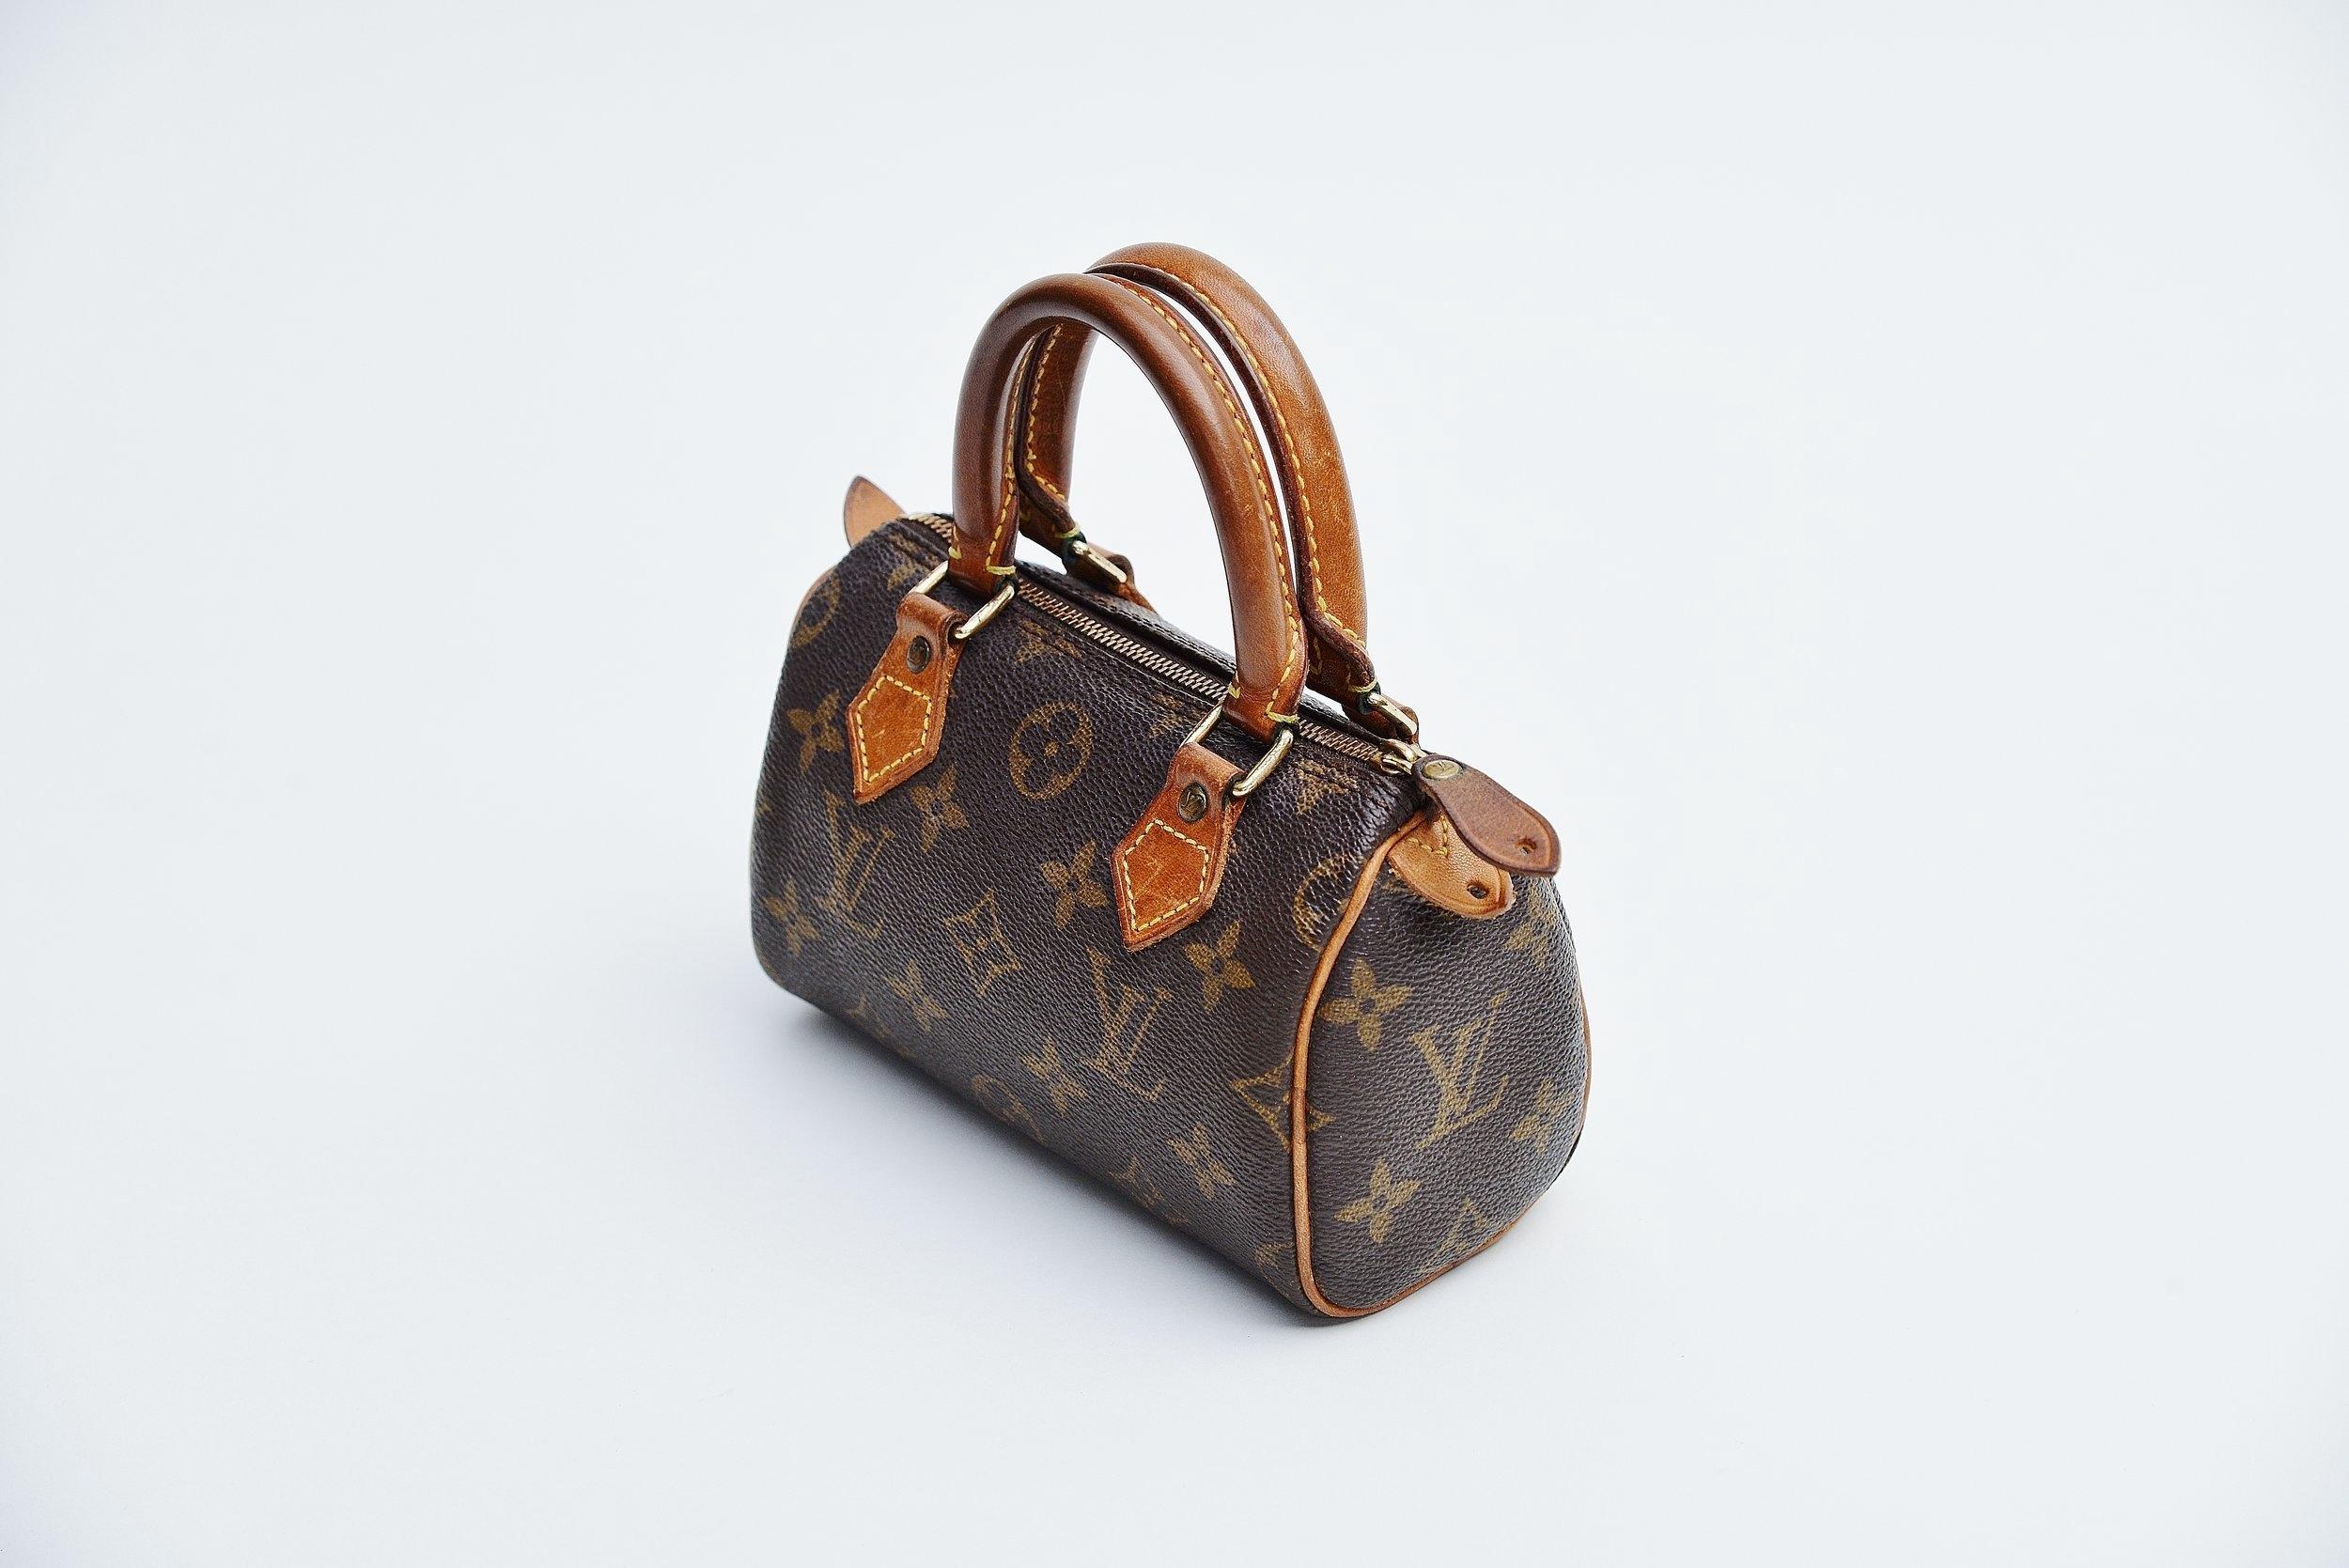 From the collection of Savineti we offer this rare Louis Vuitton Mini Speedy:
-	Brand: Louis Vuitton
-	Model: Mini Speedy
-	Year: 1994
-	Code: TH0944
-	Condition: Good
-	Materials: monogram canvas with leather handles
-	Length of the handle: 6.5cm